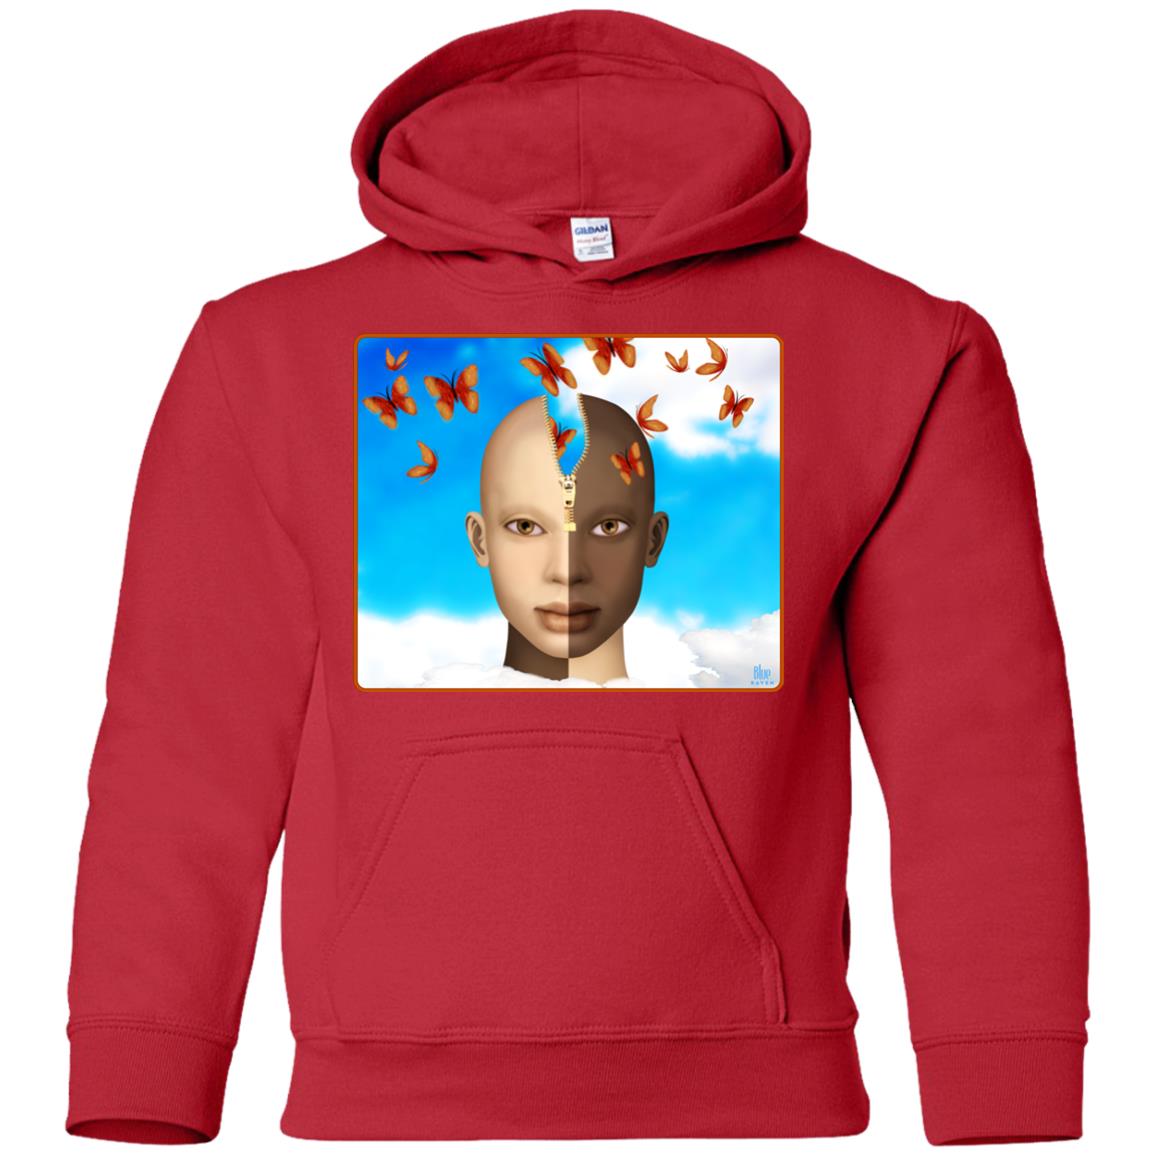 color of our thoughts - Youth Hoodie